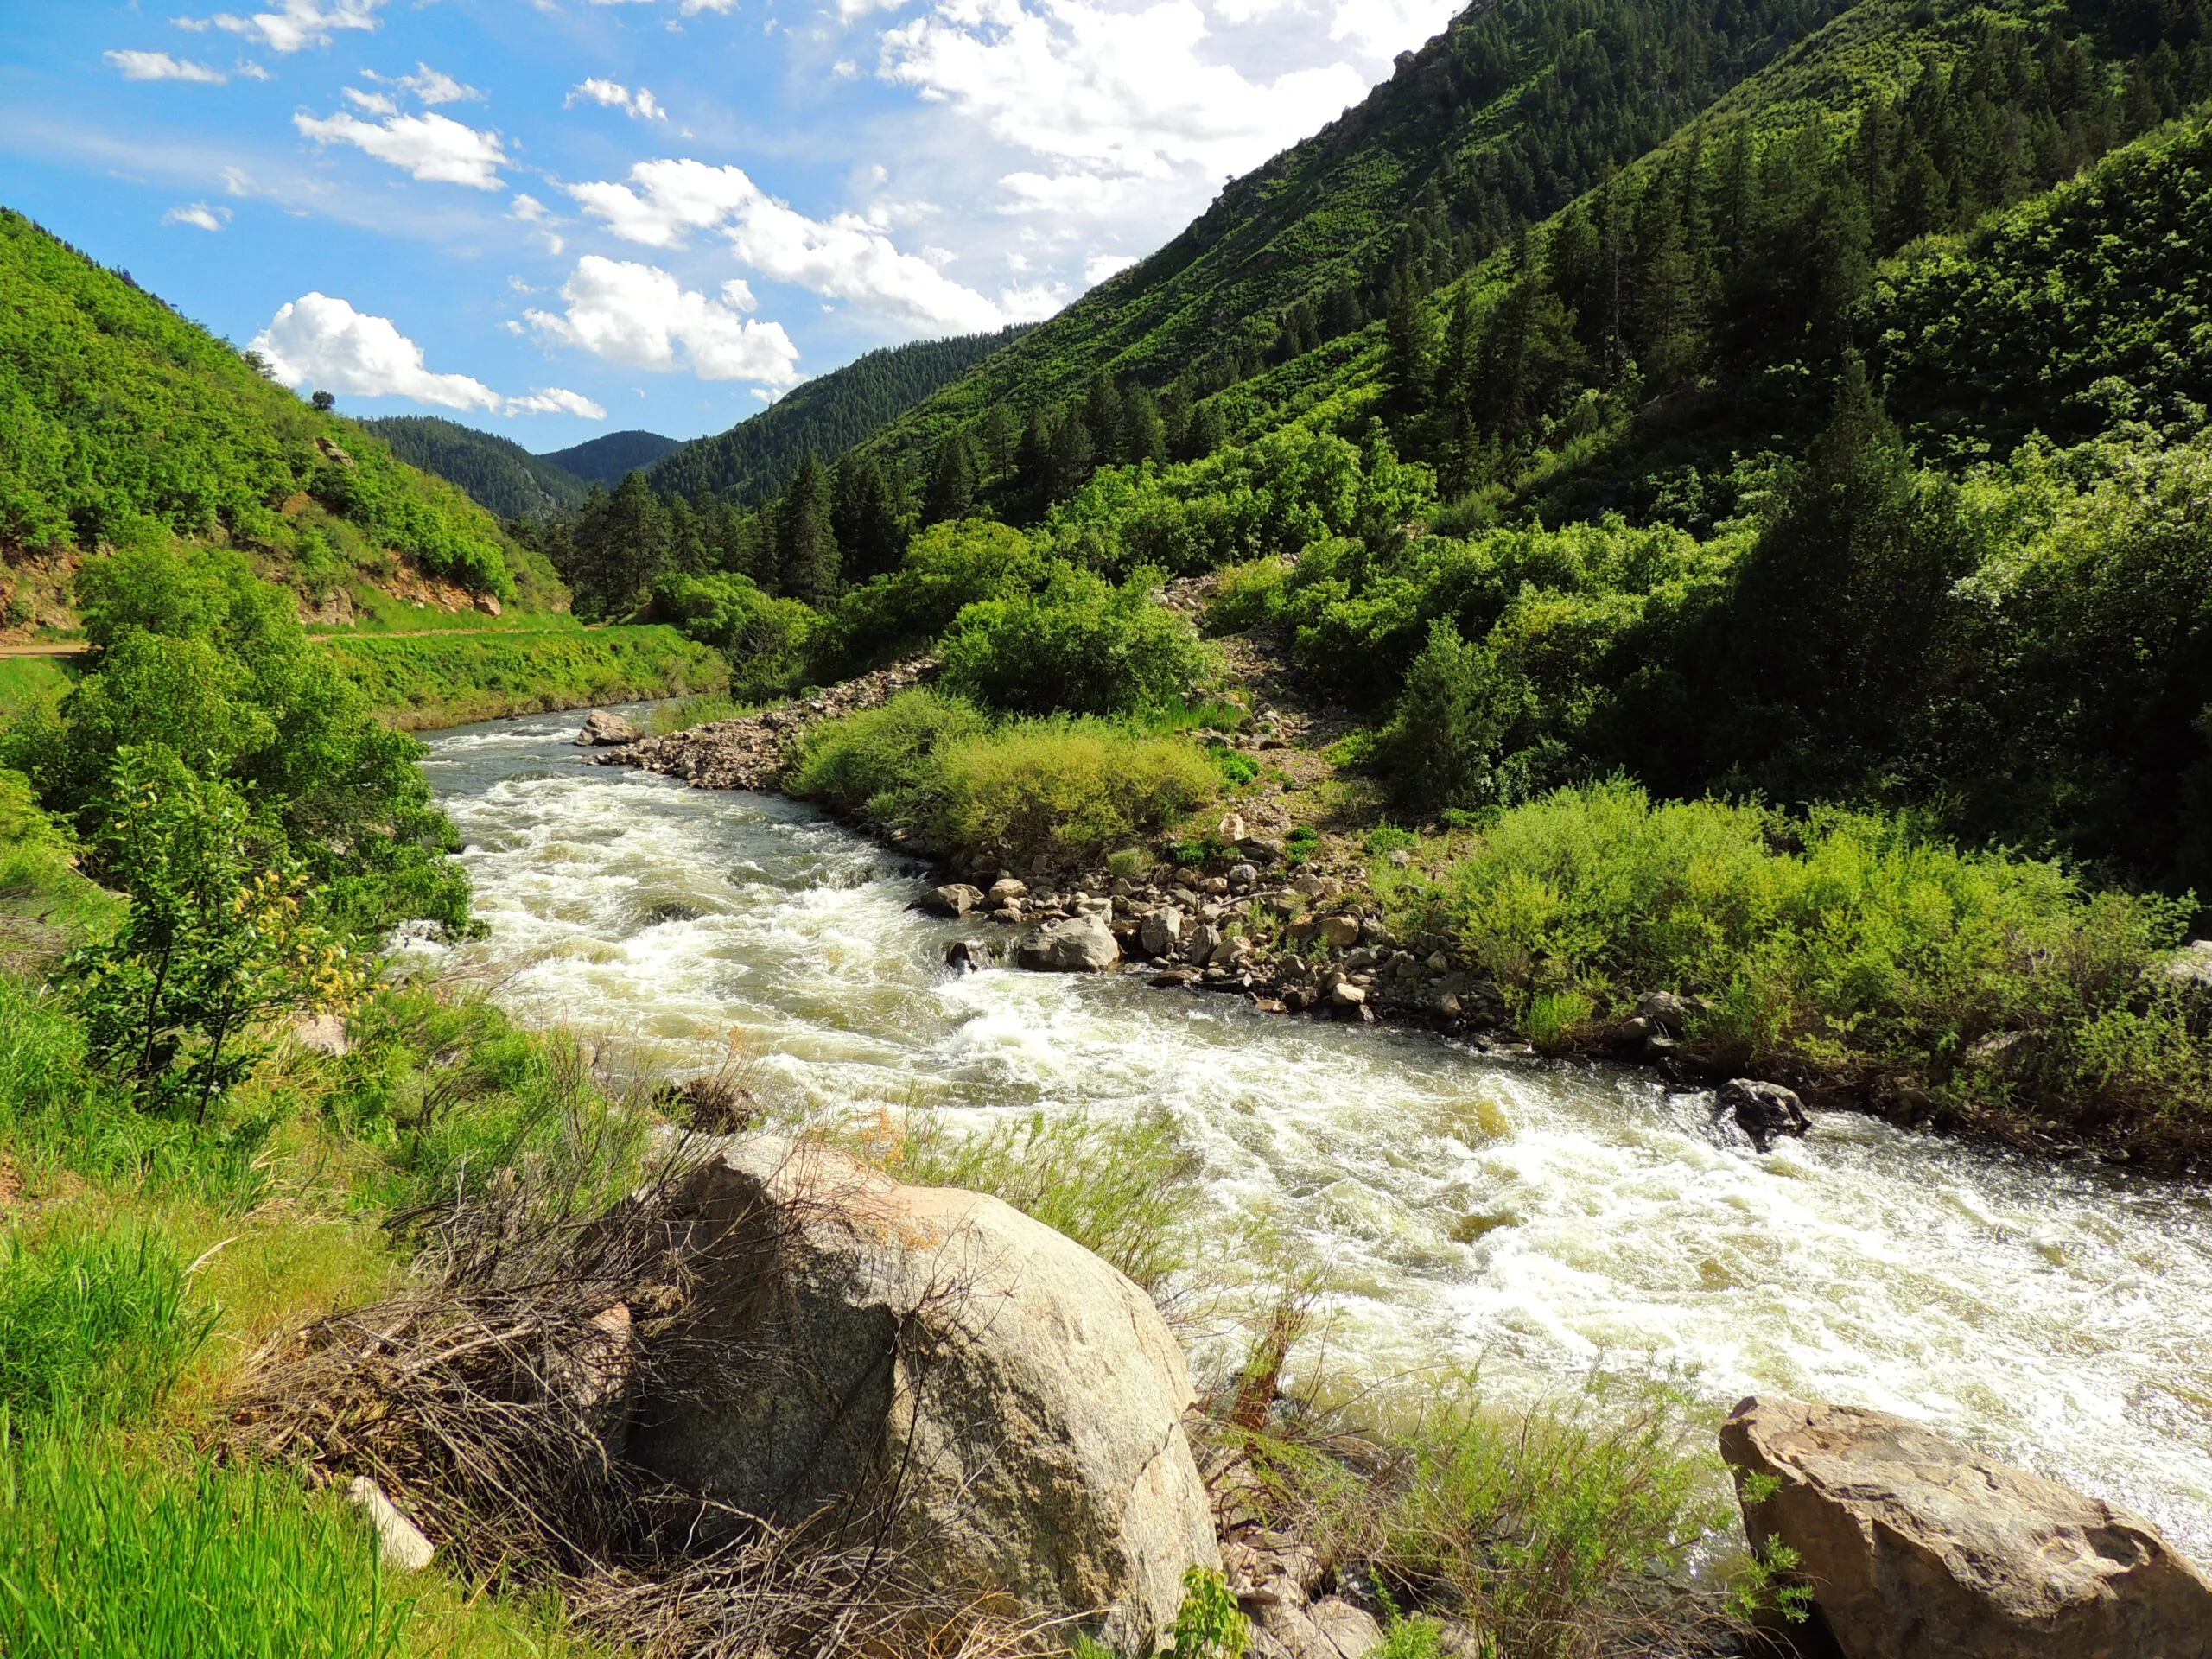 Abundant greeneries and rapids in the Waterton Canyon Trail making in one of the best hikes near Denver